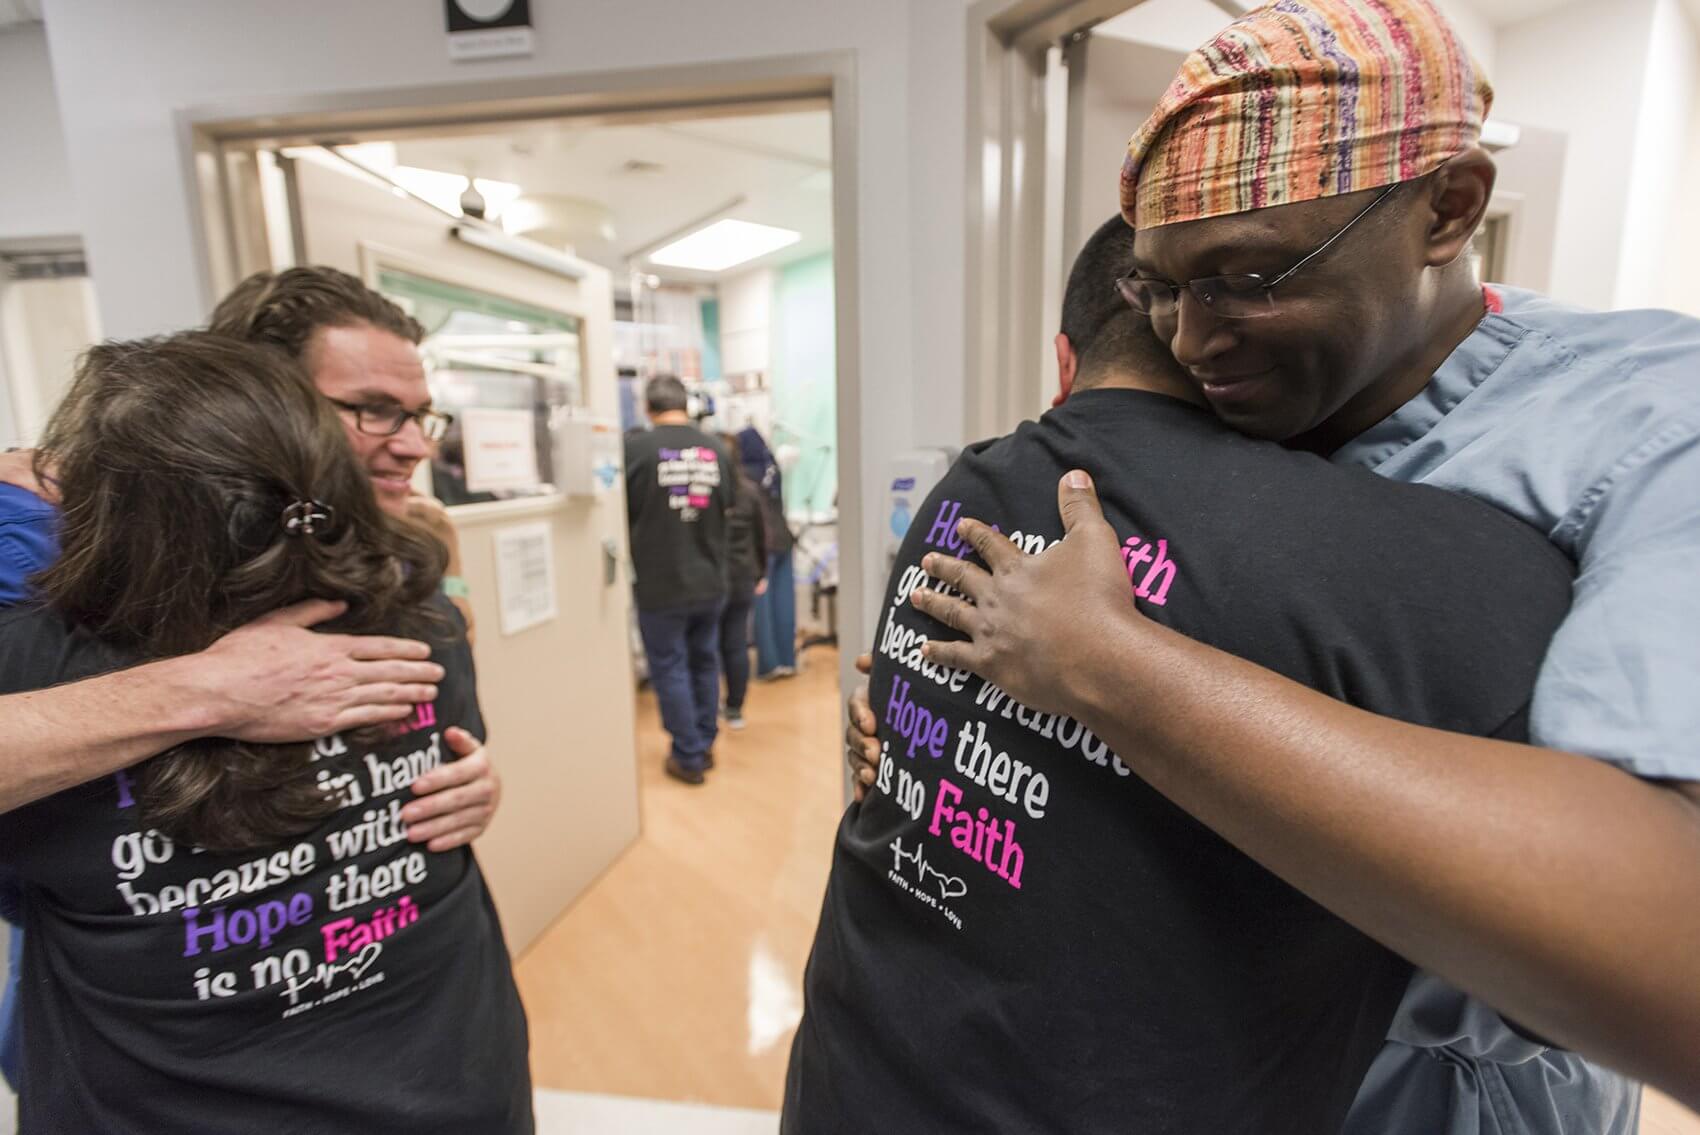 Edward Buchanan, M.D., and Oluyinka Olutoye, M.D., embrace the family after successful separation surgery. (Credit: Allen S. Kramer/Texas Children’s Hospital)